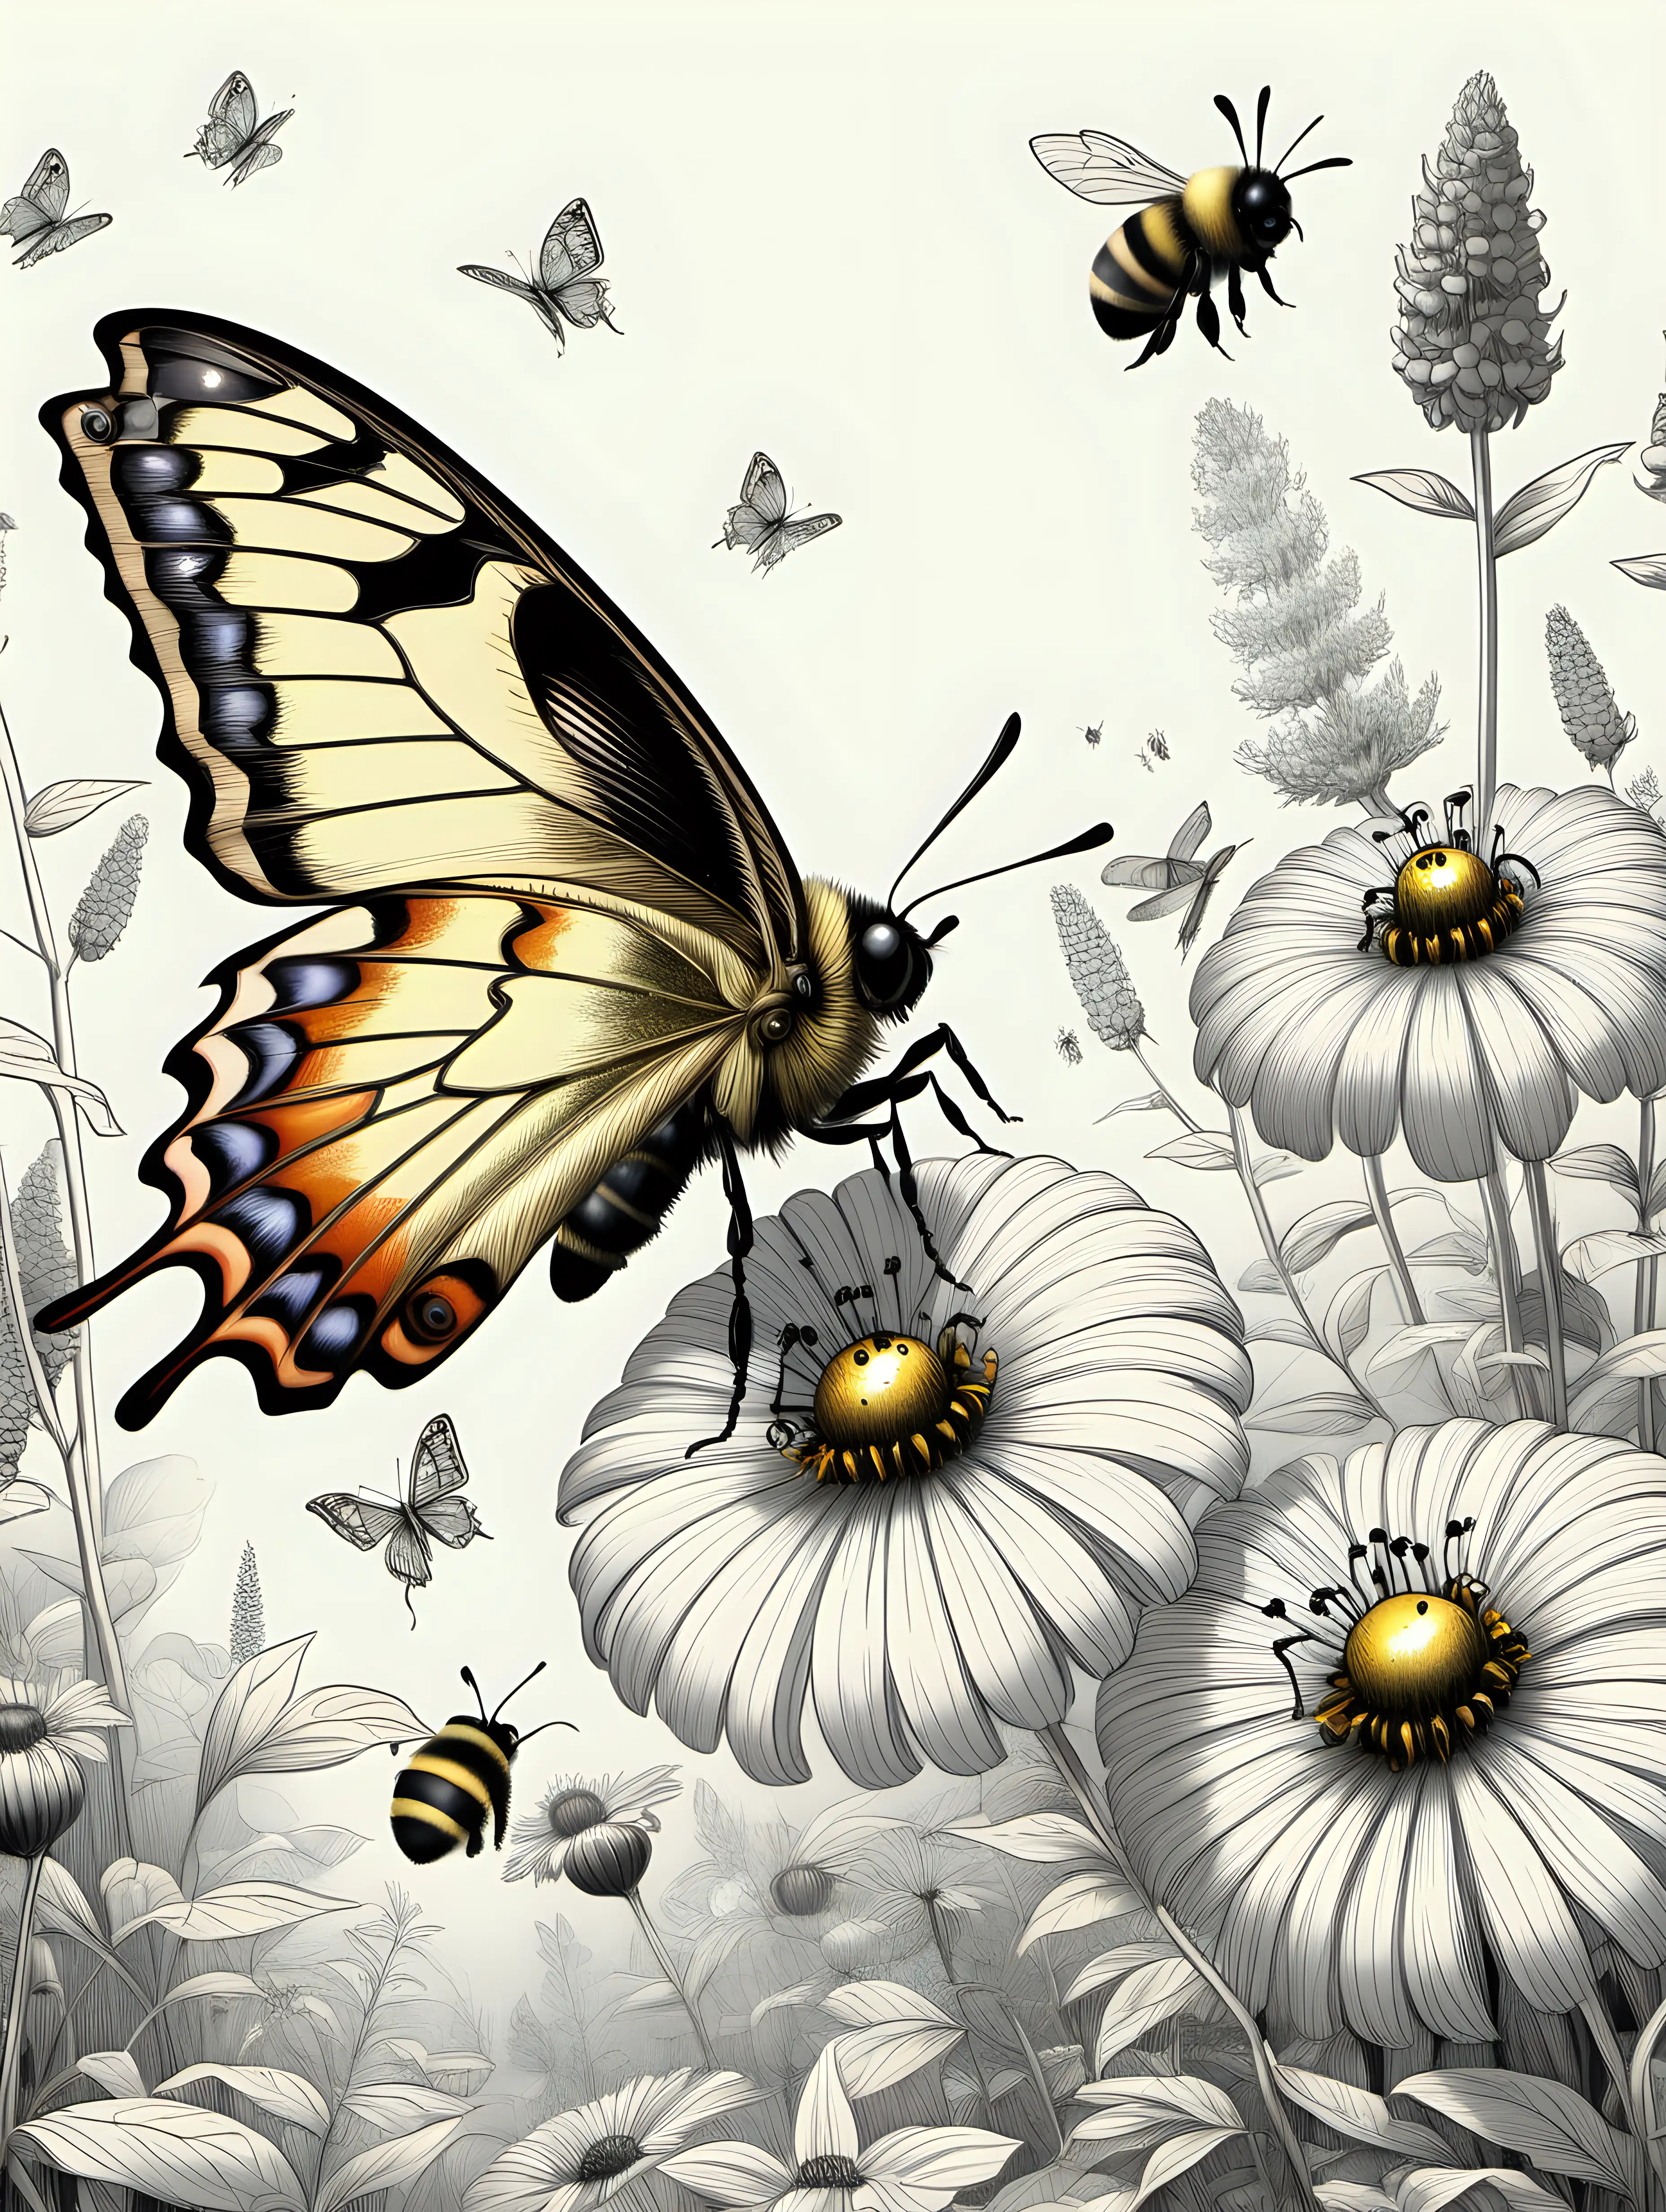 Vibrant Butterfly and Bumble Bees Illustration with Thick Lines and High Detail